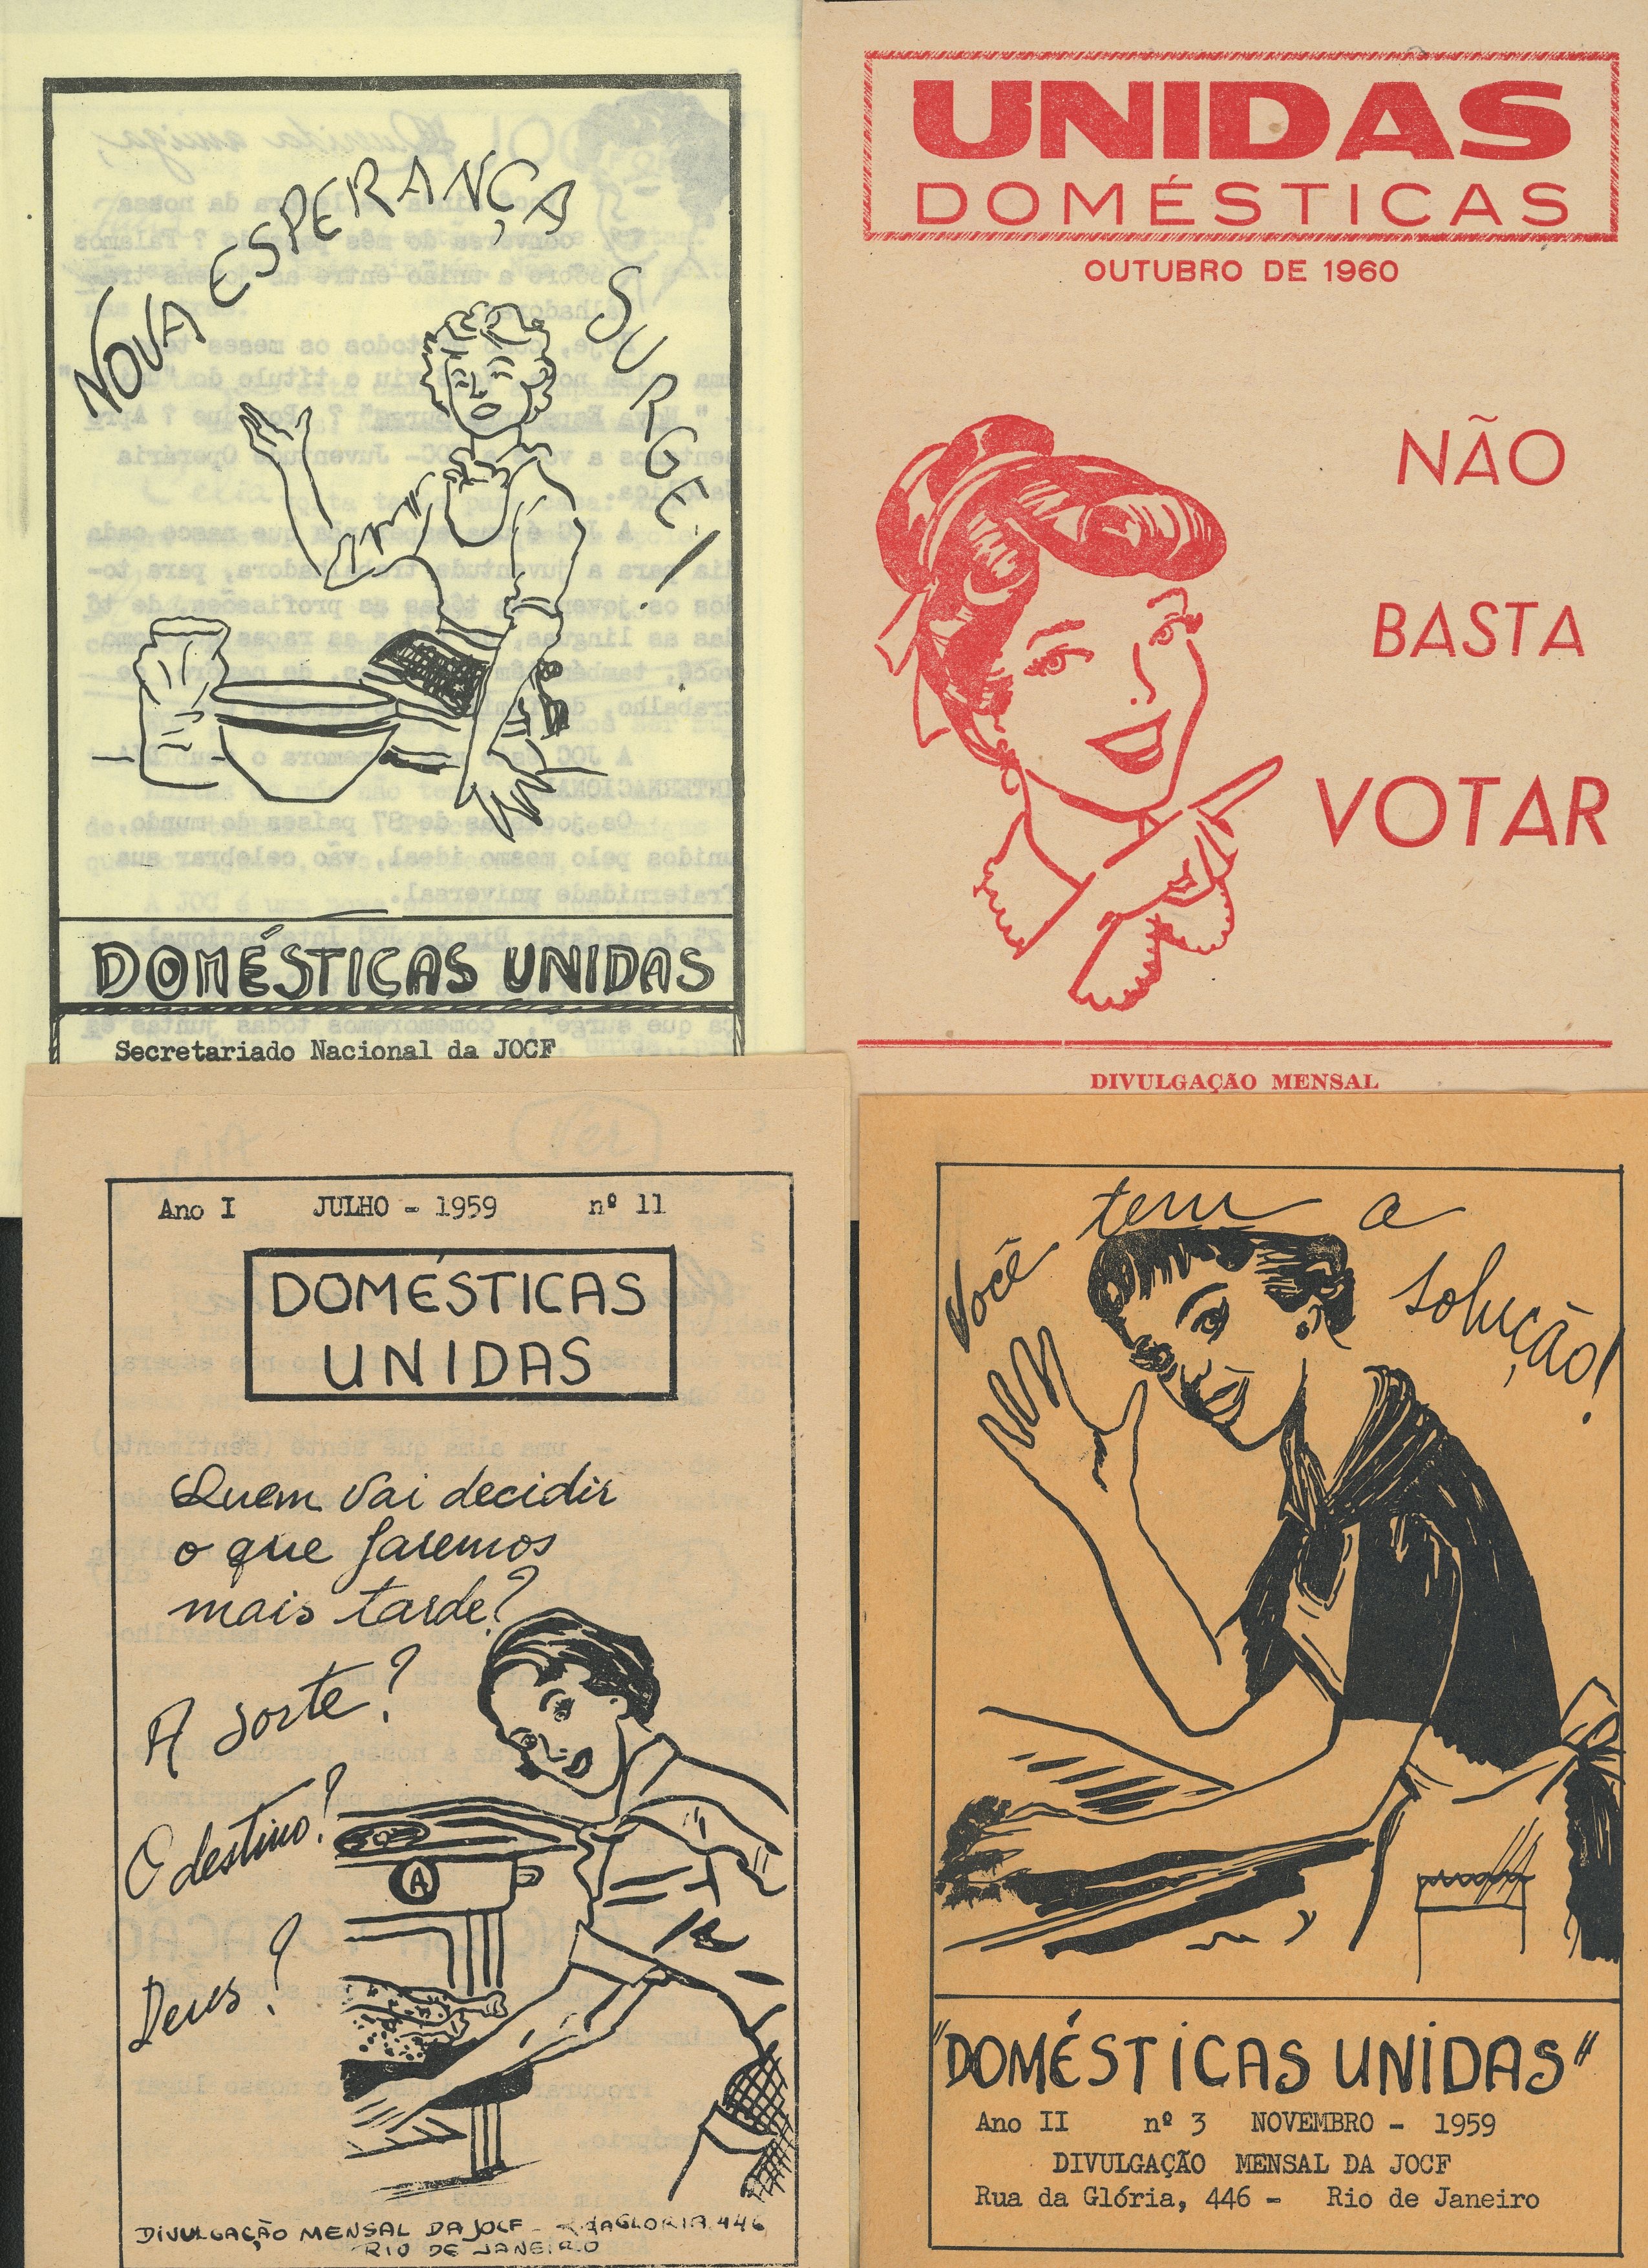 Domesticas Unidas made domésticas aware of the injustice they were suffering. By 1961, over 6000 domestic copies were distributed monthly